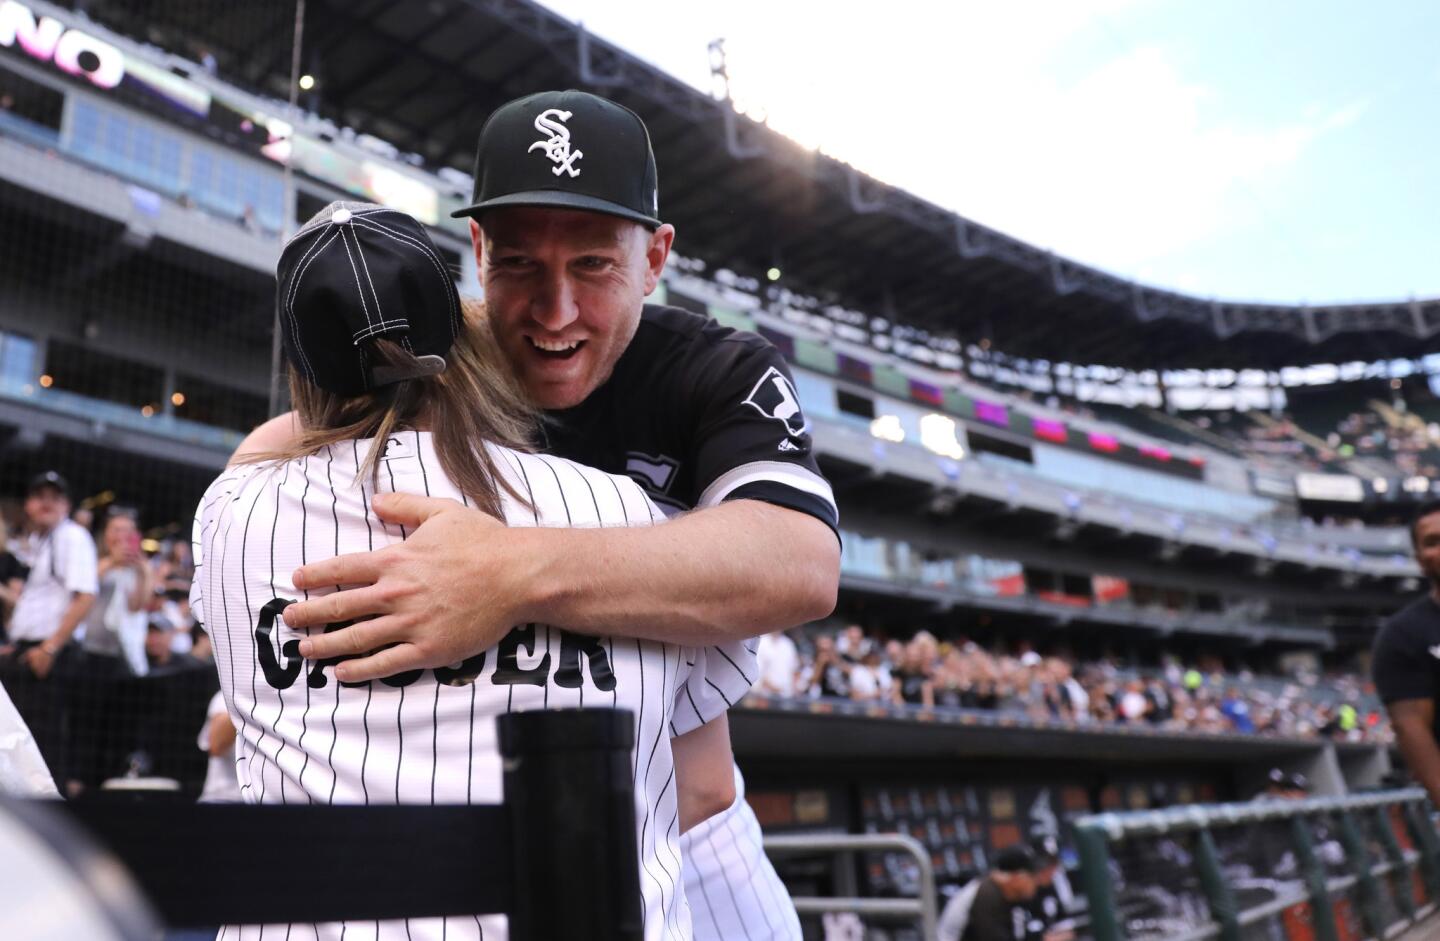 White Sox third baseman Todd Frazier gives a hug to a fan before game against the Los Angeles Dodgers at Guaranteed Rate Field on July 18, 2017. Frazier was traded to the New York Yankees after the game.